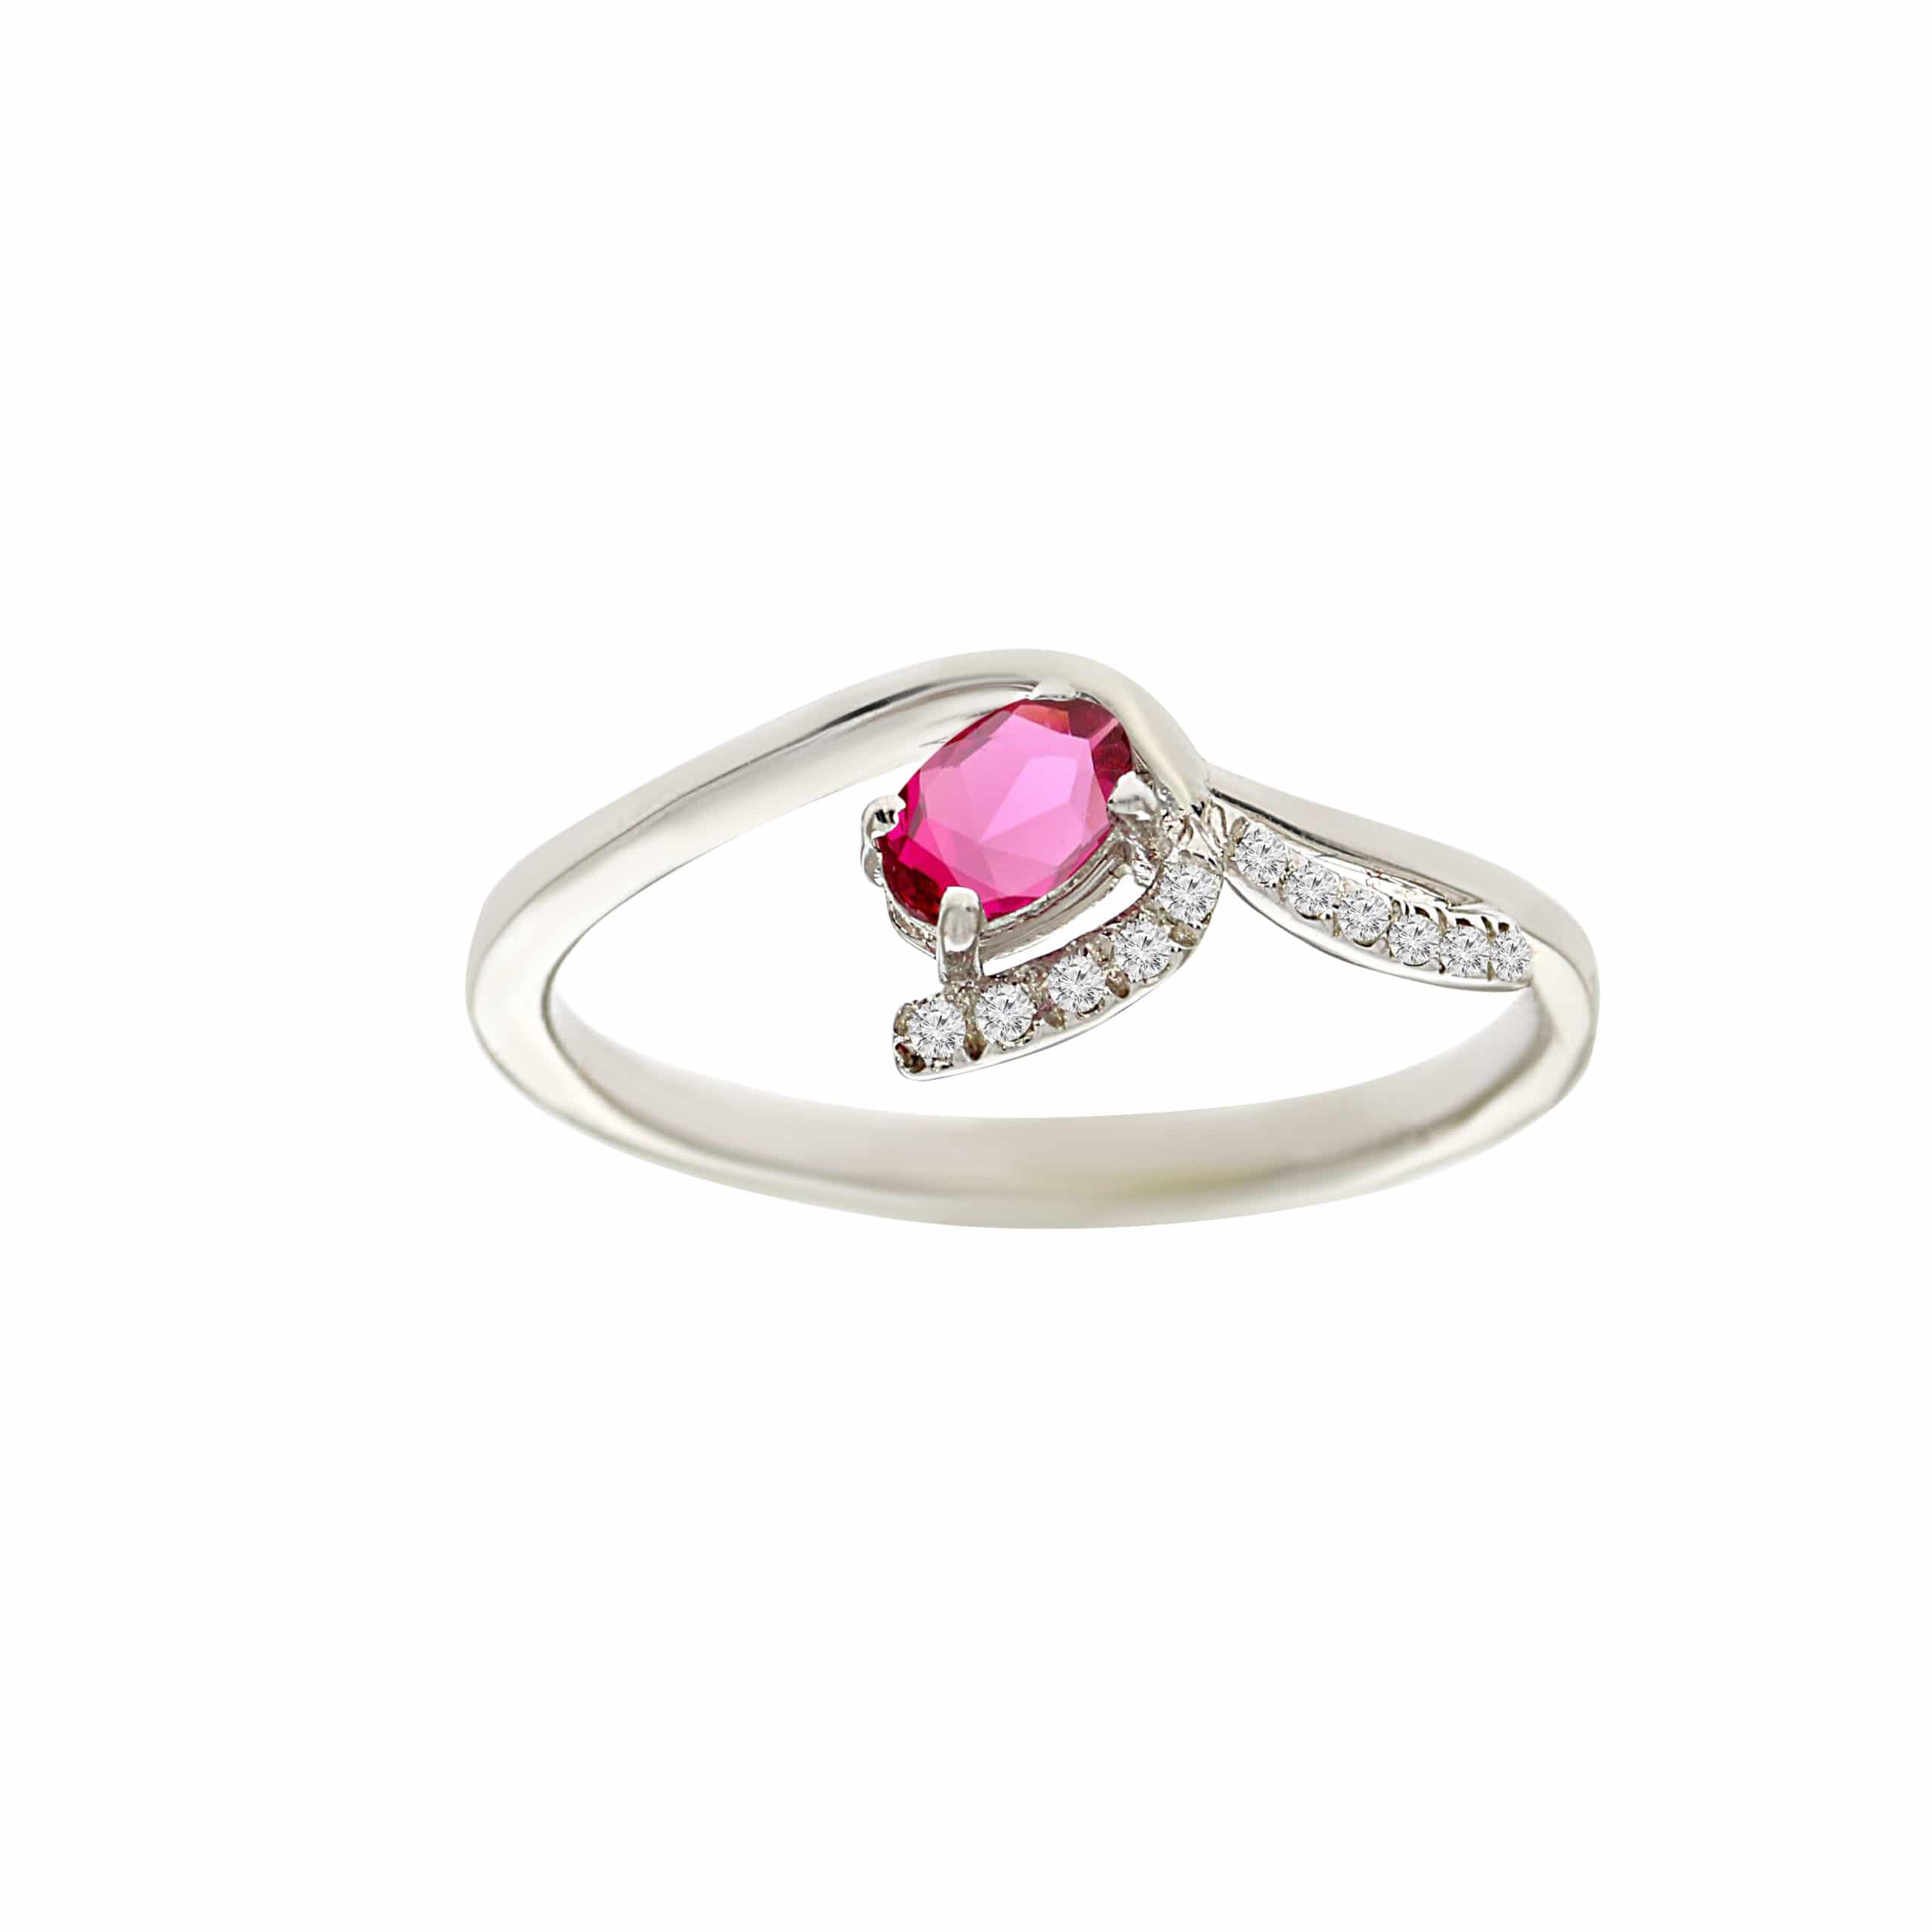 0.30ct Ruby and Diamonds Ring, 14K White Gold